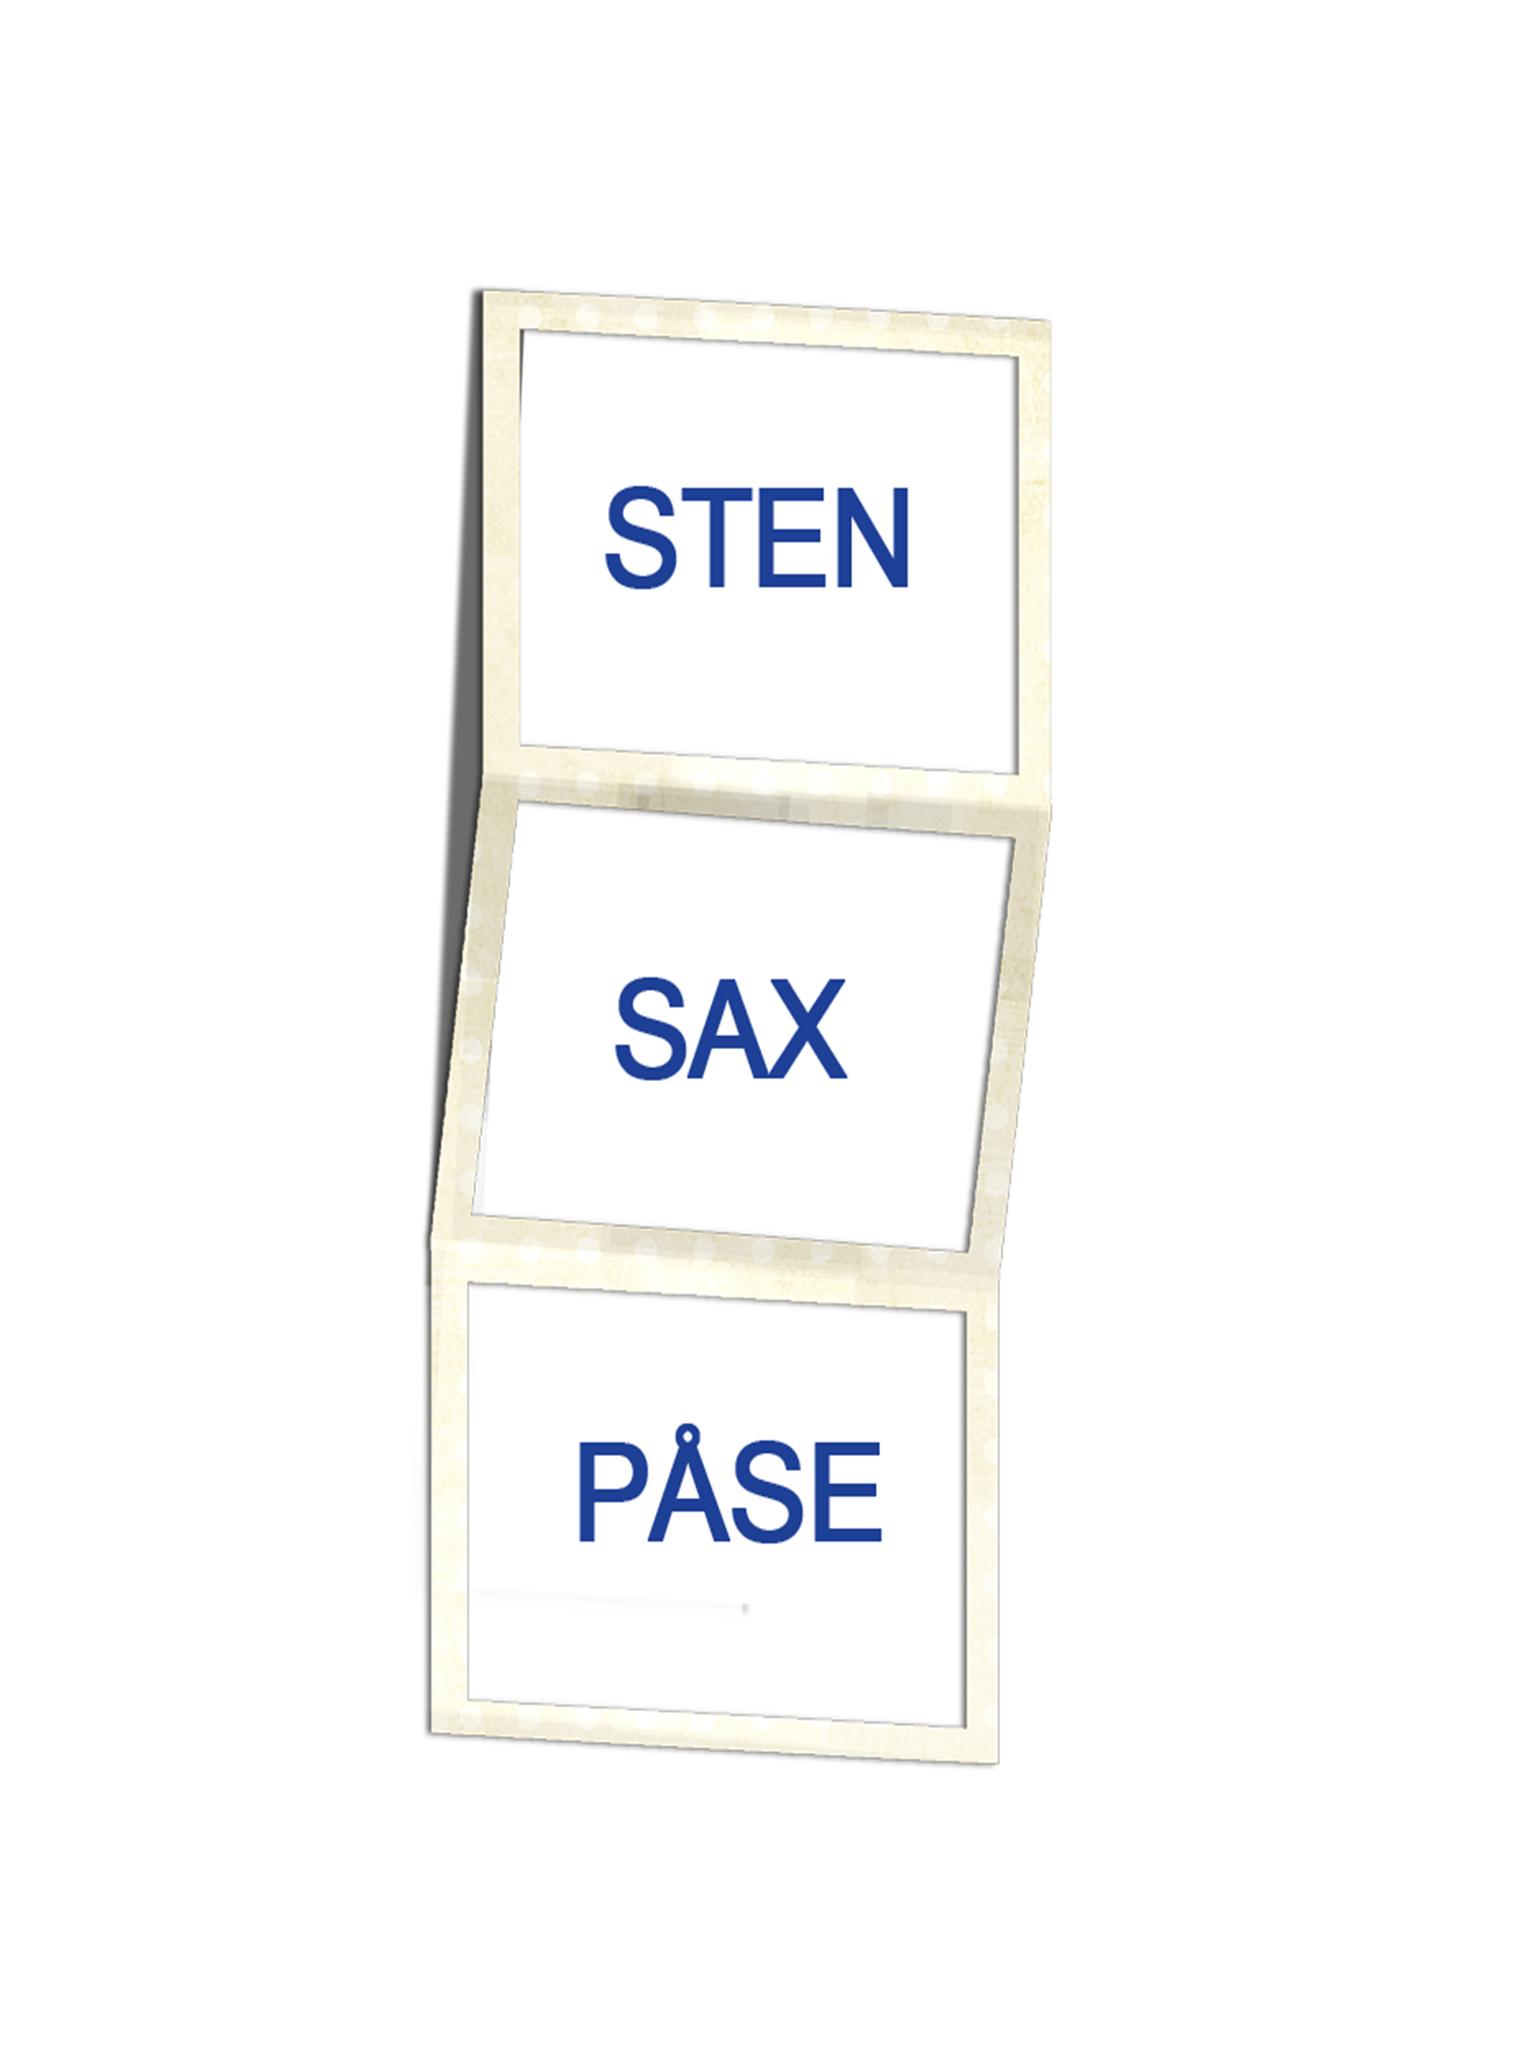 Sten Sax Pase for Android - APK Download